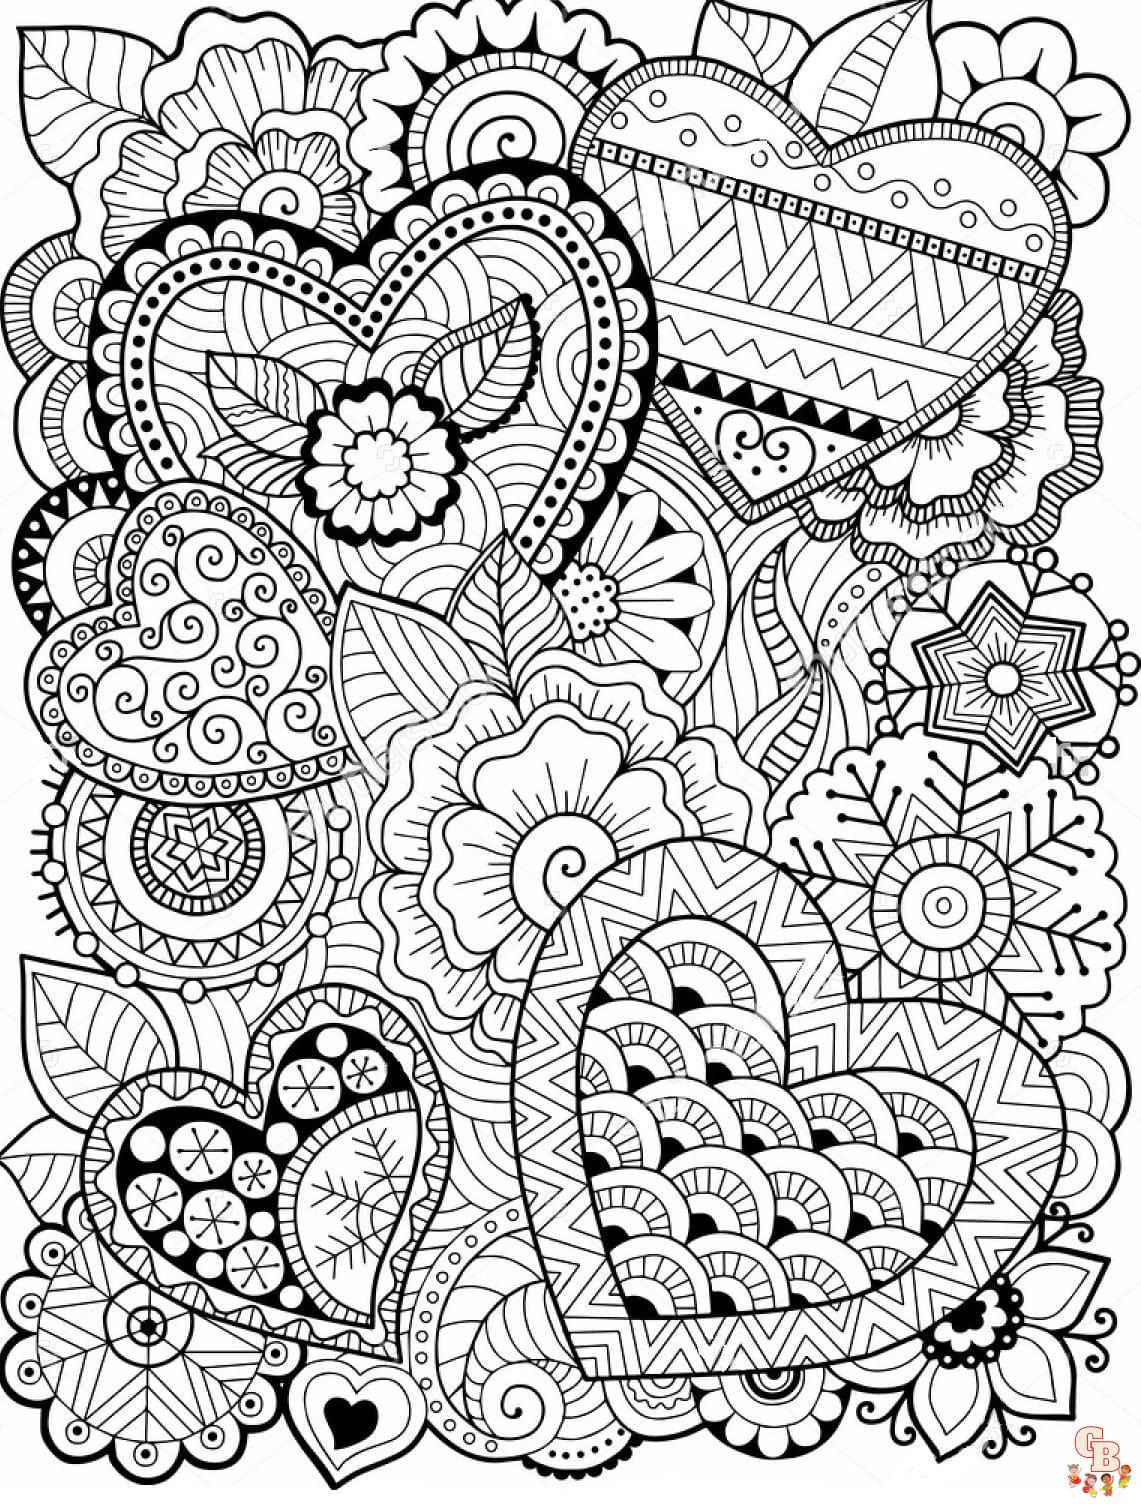 Zentangle coloring pages free